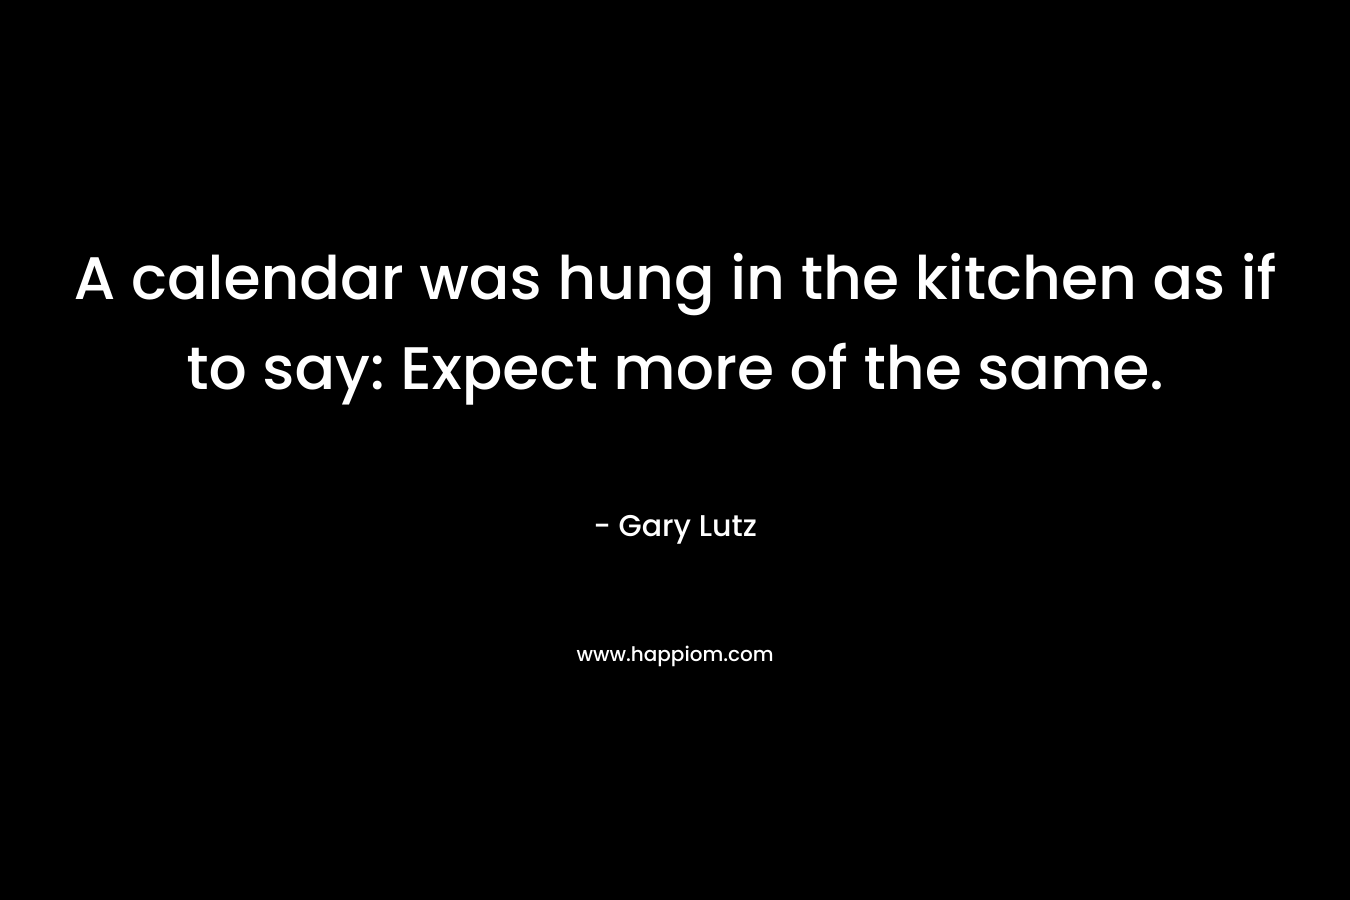 A calendar was hung in the kitchen as if to say: Expect more of the same. – Gary Lutz